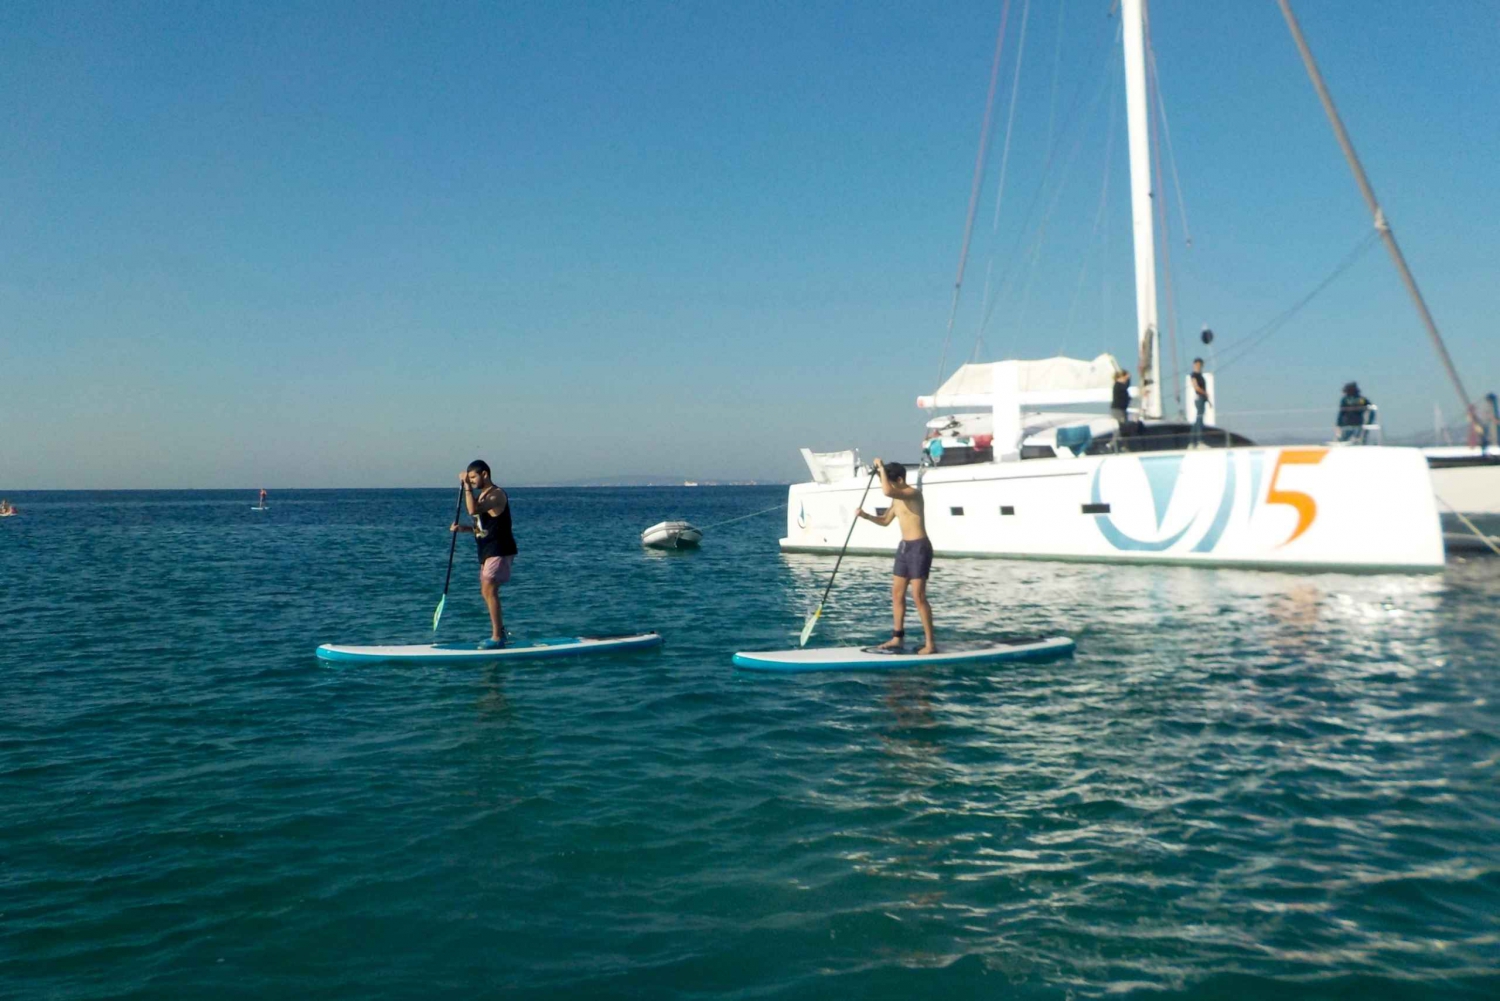 Can Pastilla : Stand-up-paddle rental